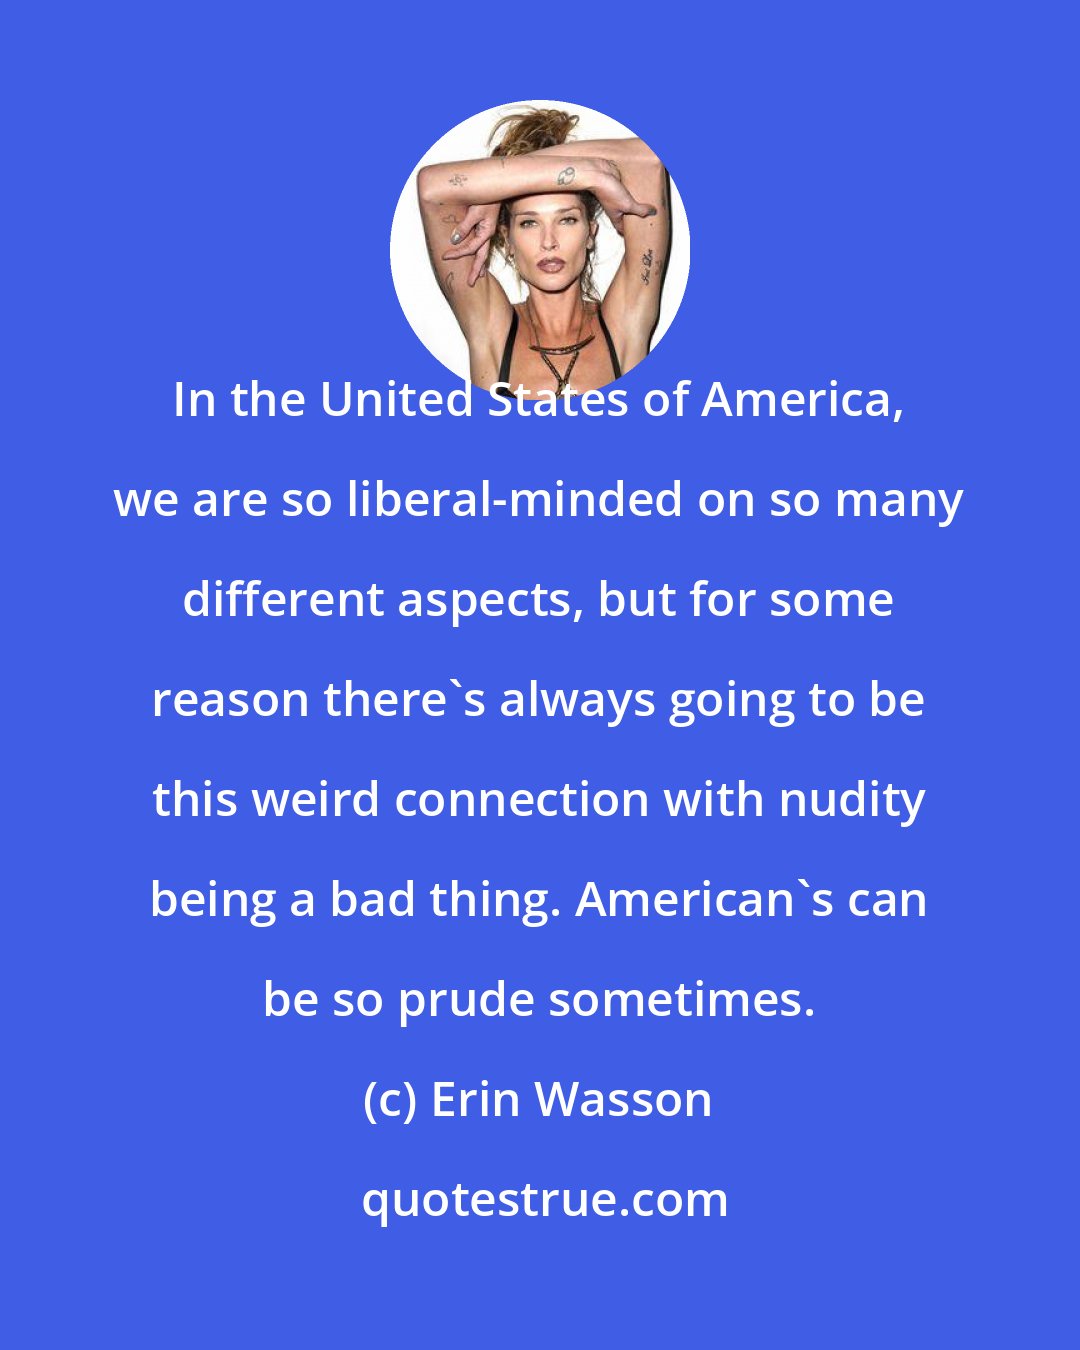 Erin Wasson: In the United States of America, we are so liberal-minded on so many different aspects, but for some reason there's always going to be this weird connection with nudity being a bad thing. American's can be so prude sometimes.